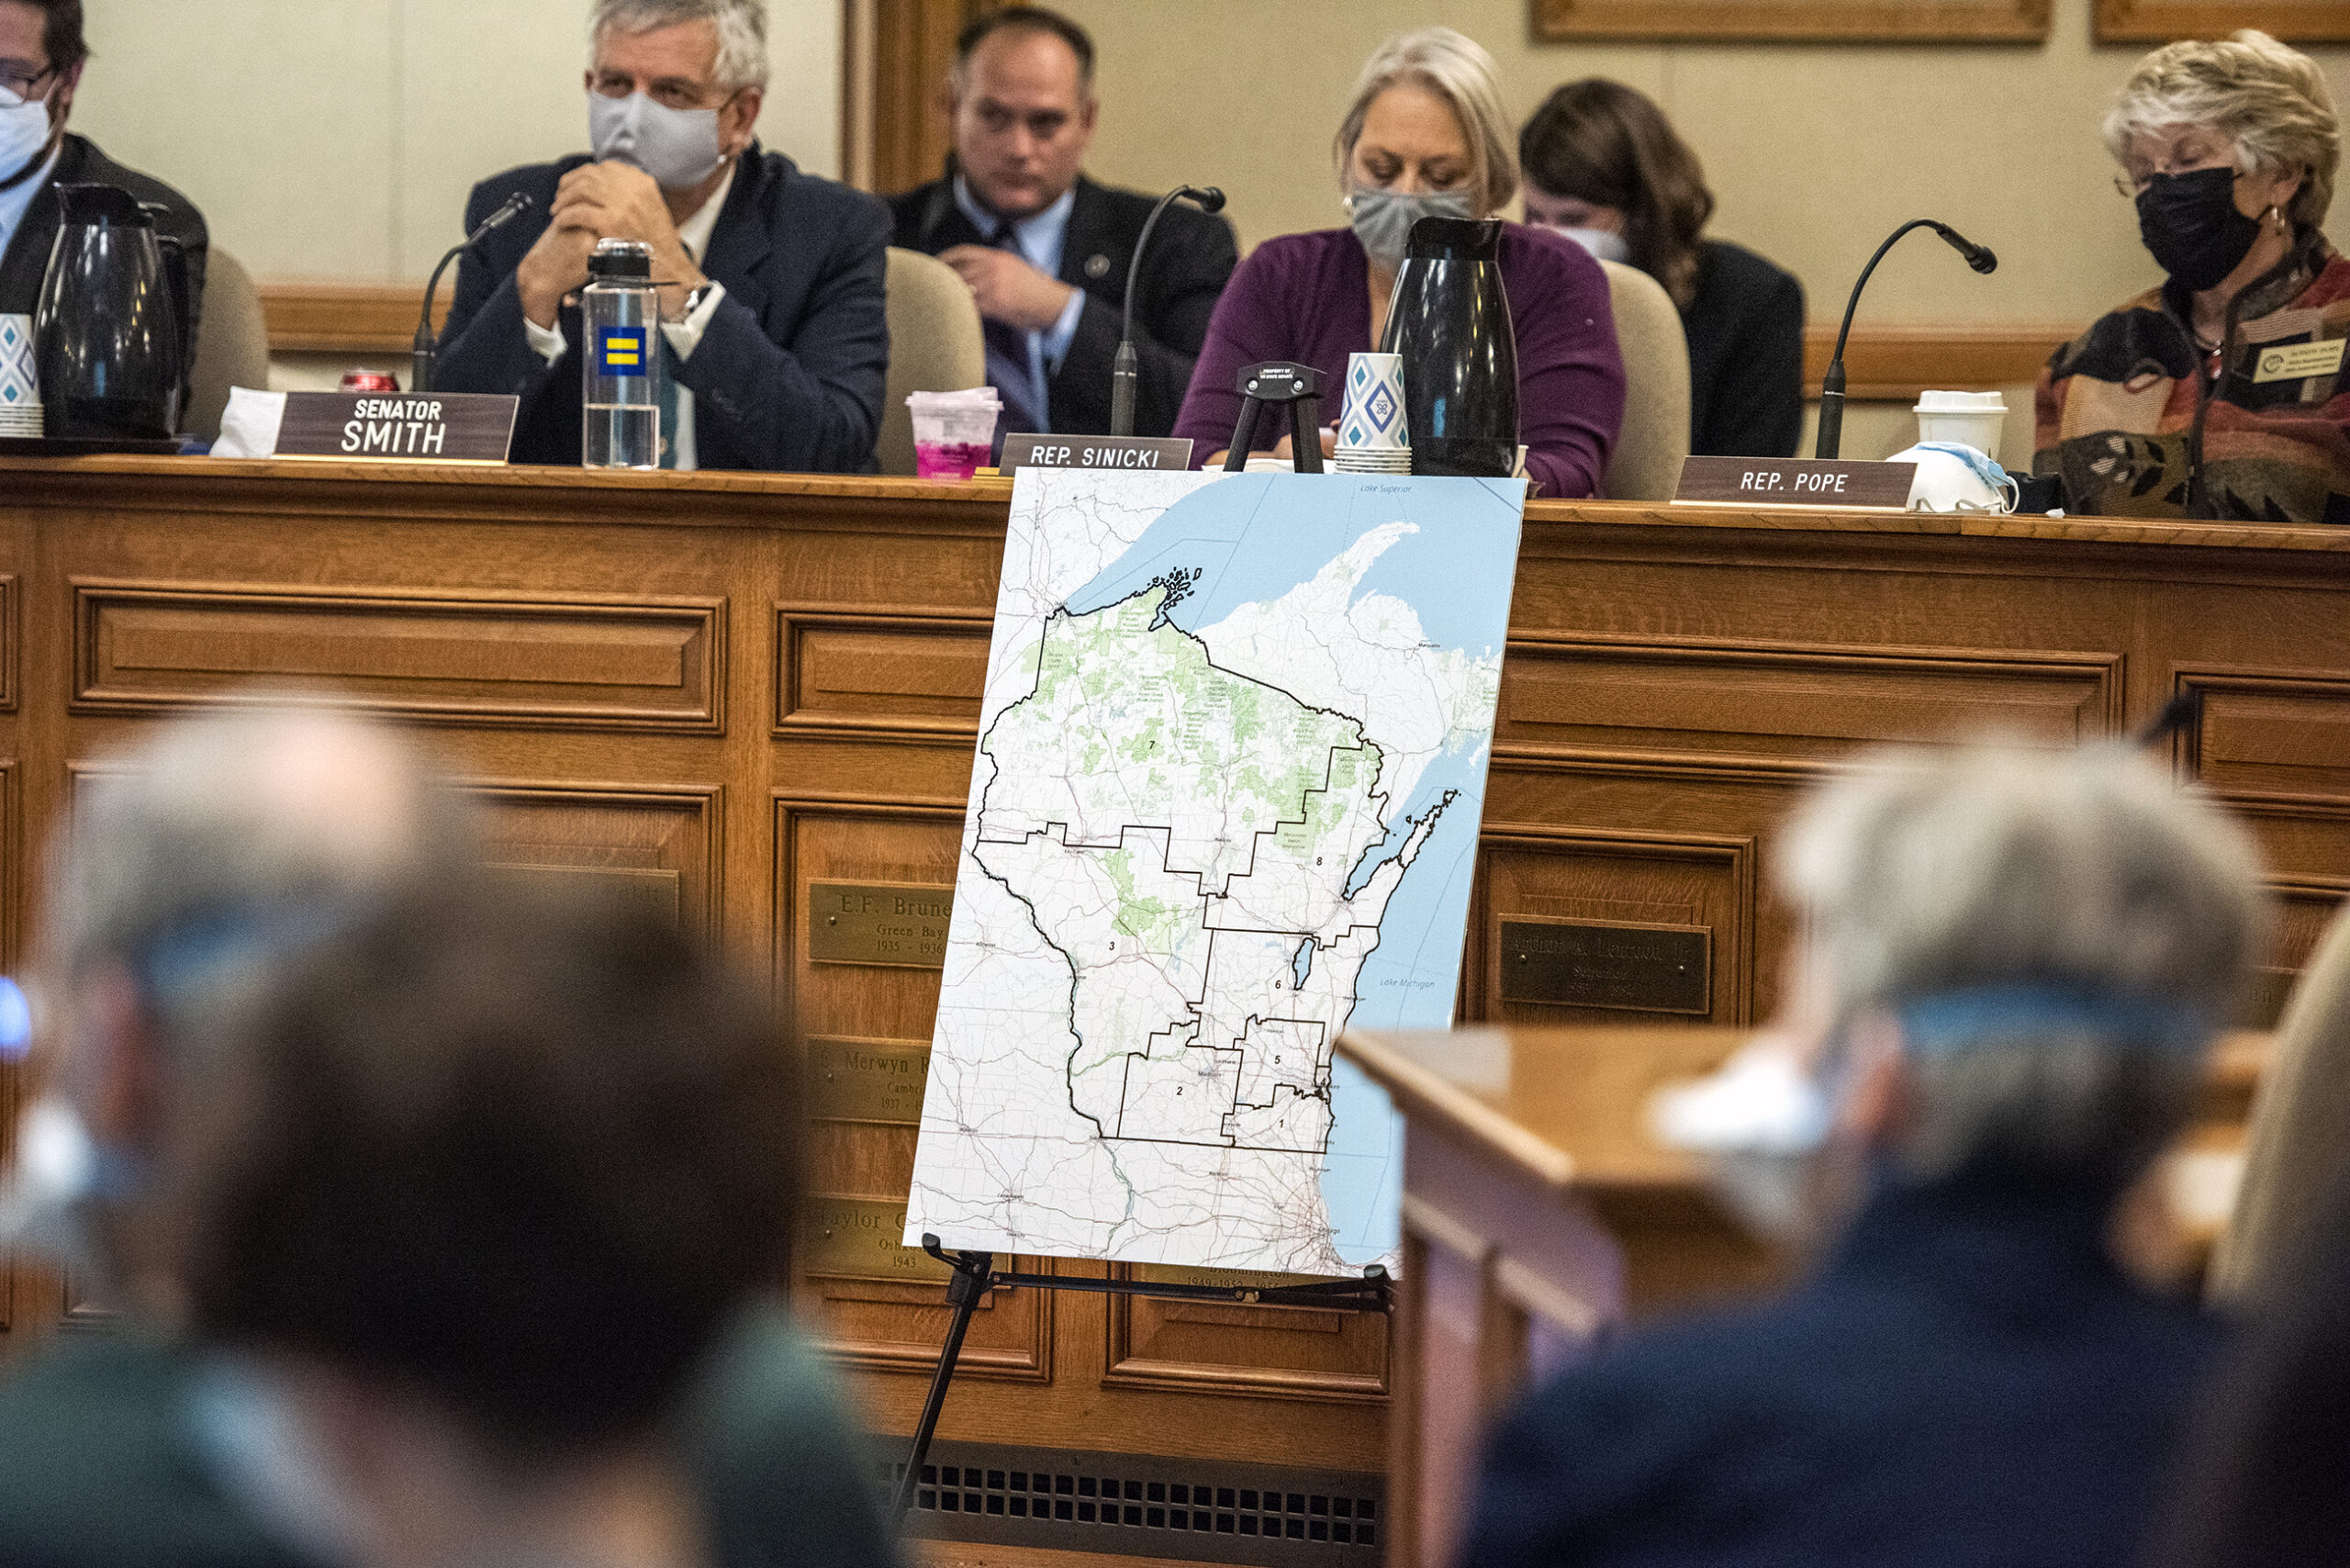 A poster showing a map of Wisconsin is displayed in front of state senators at a hearing.